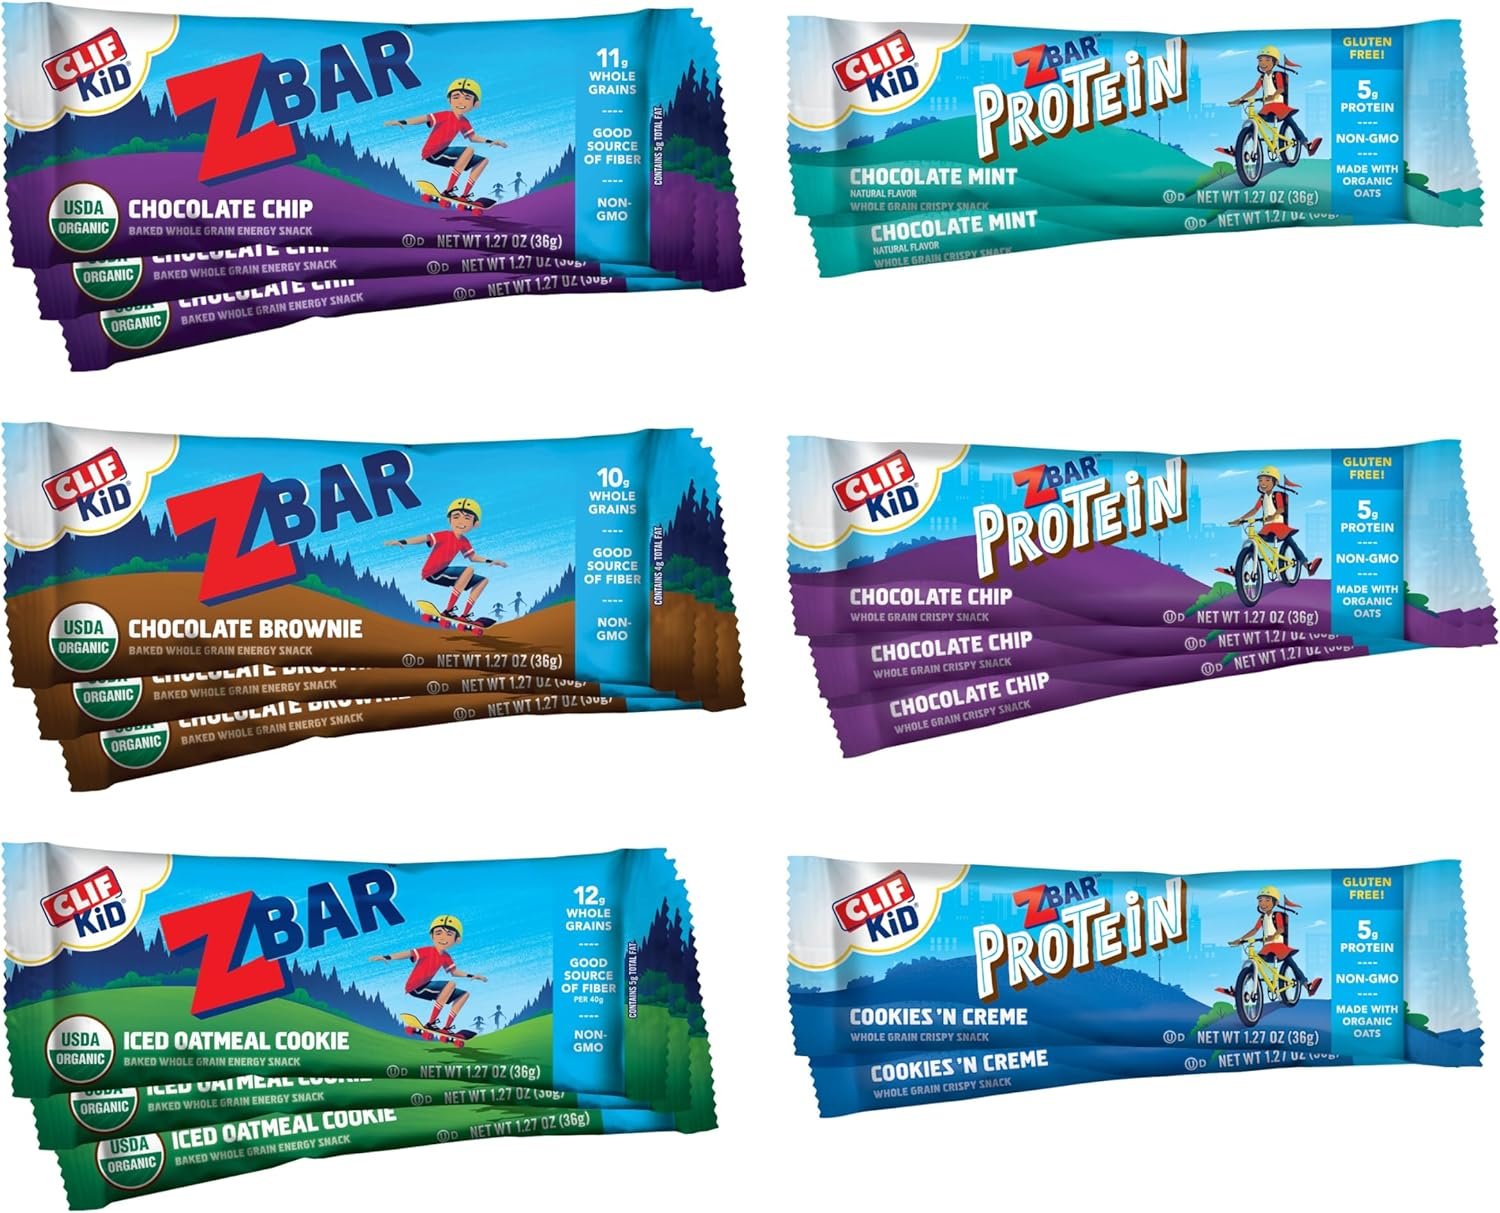 CLIF Kid Zbar and Zbar Protein Review